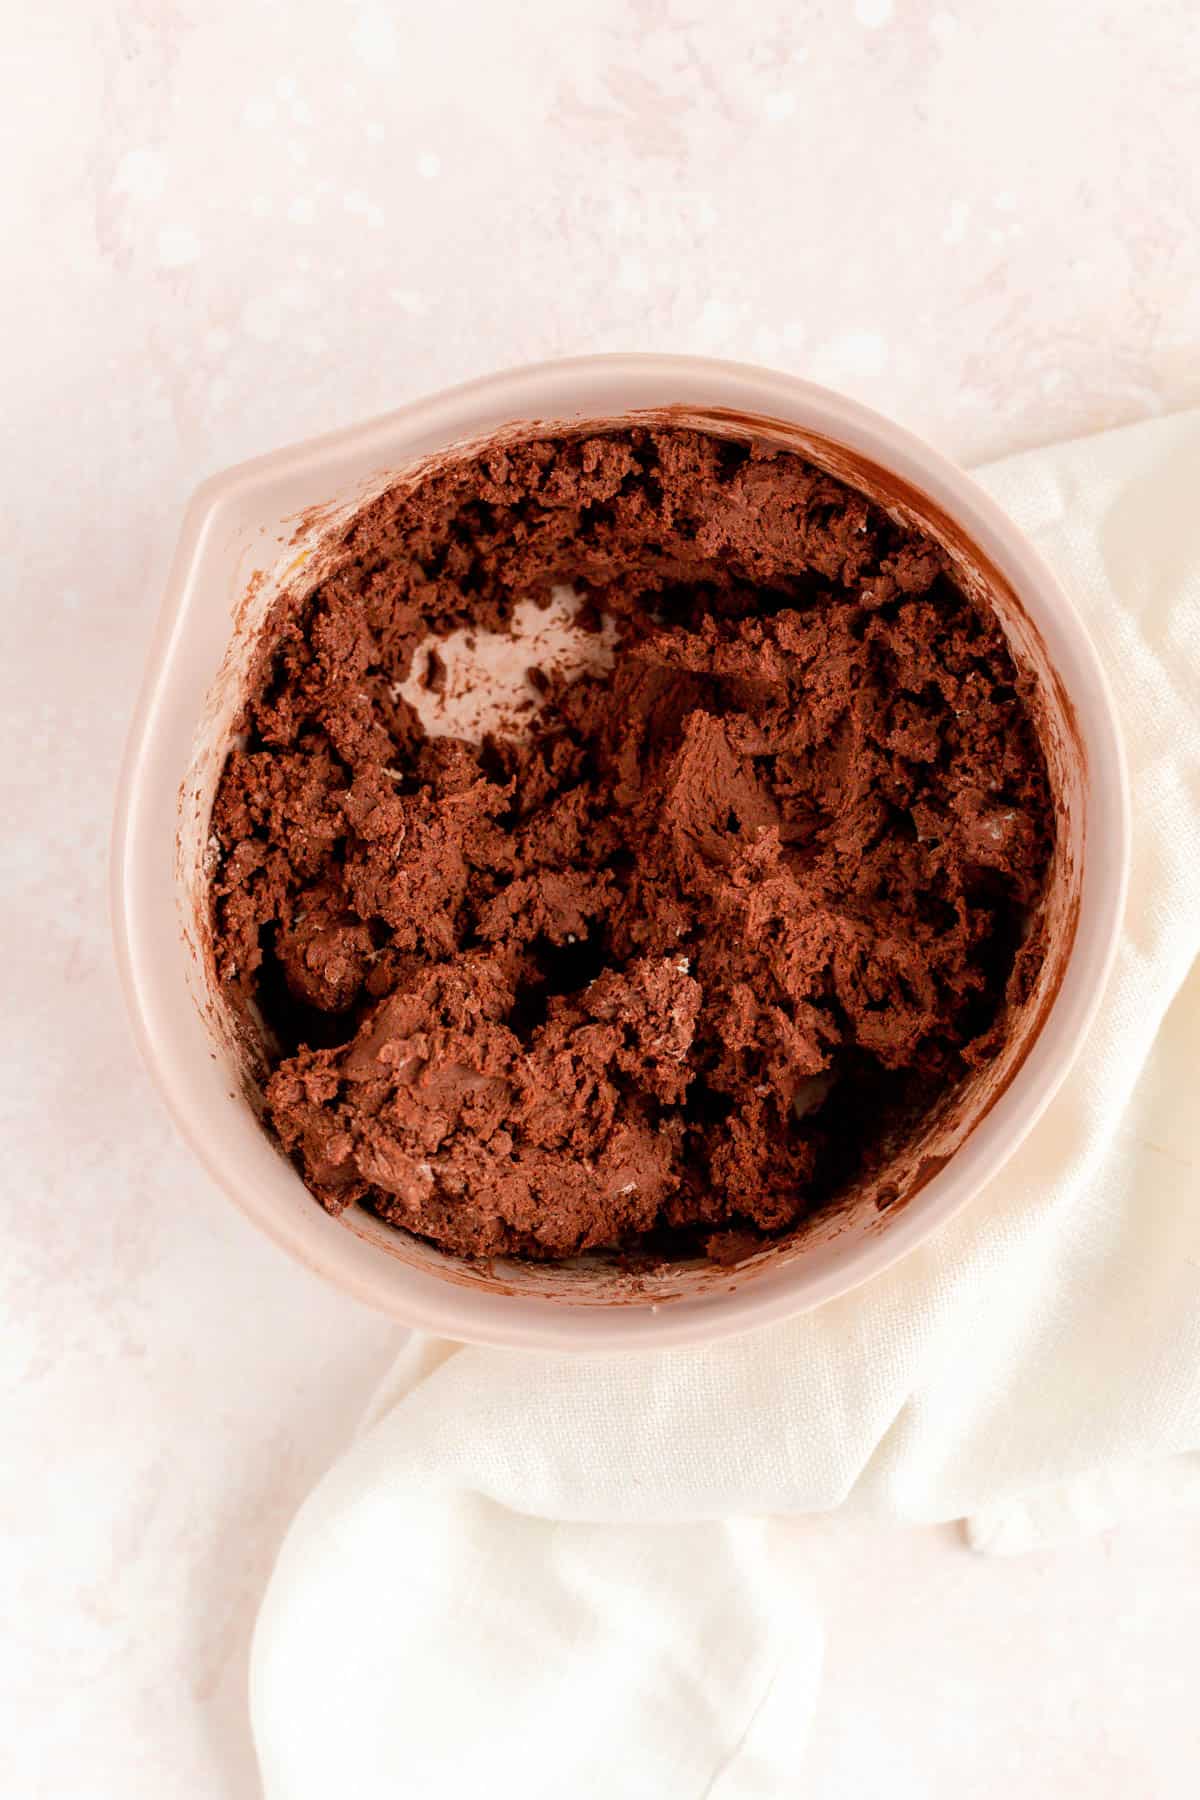 Chocolate butter cookie dough mixed in a brown bowl on a pink background